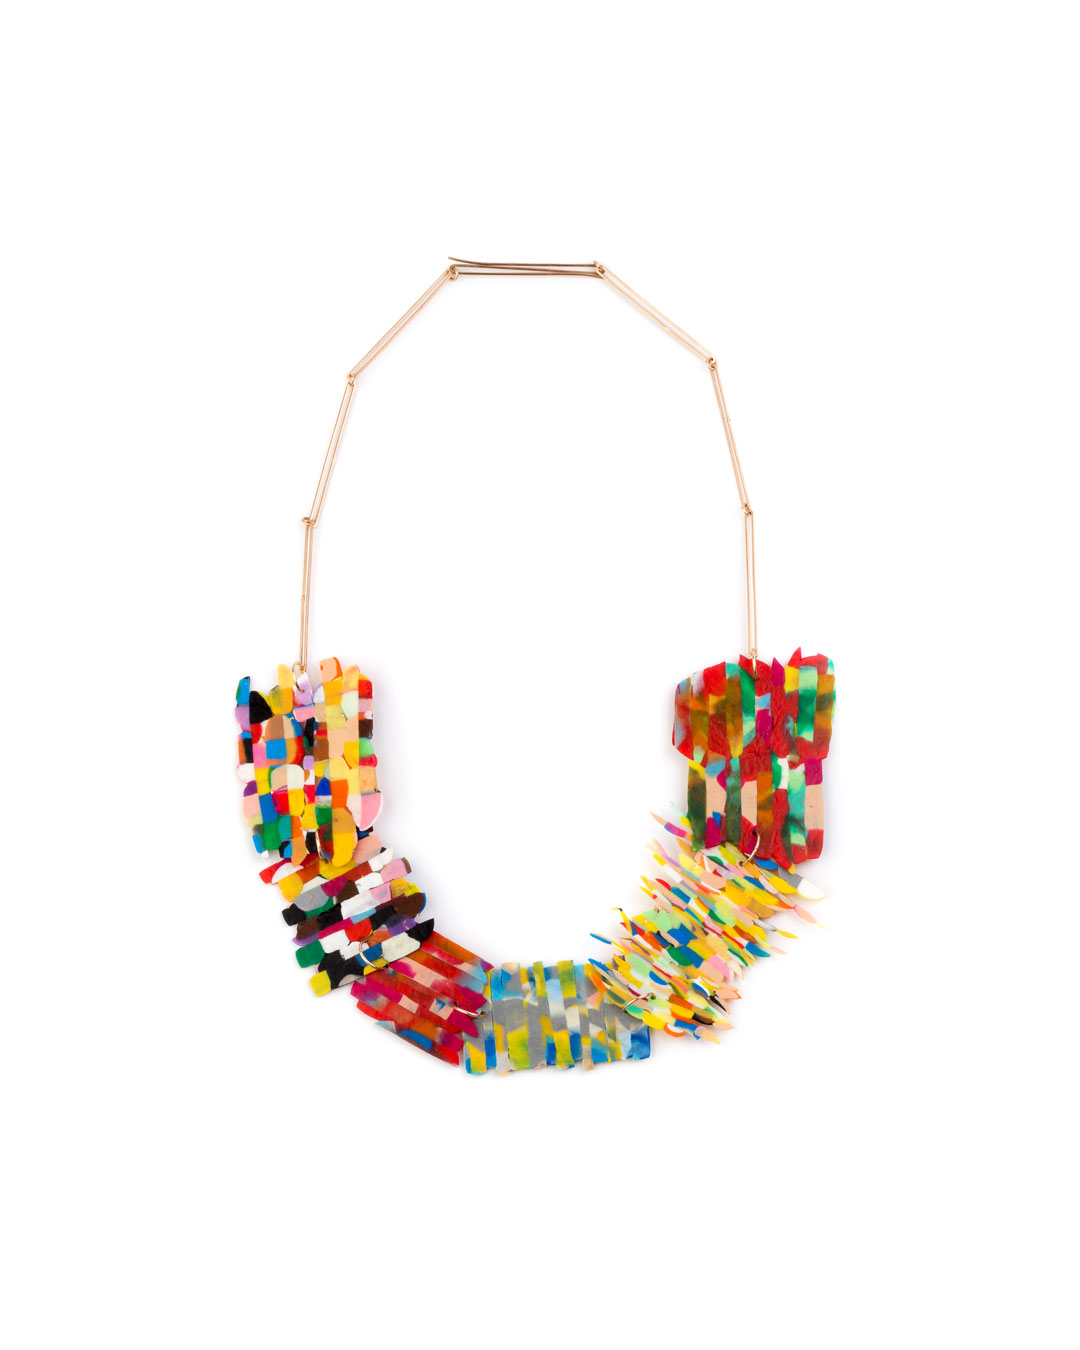 Karola Torkos, Patches, 2020, necklace; recycled plastic, 14ct rose gold, rose gold-plated copper, L 670 mm, €560